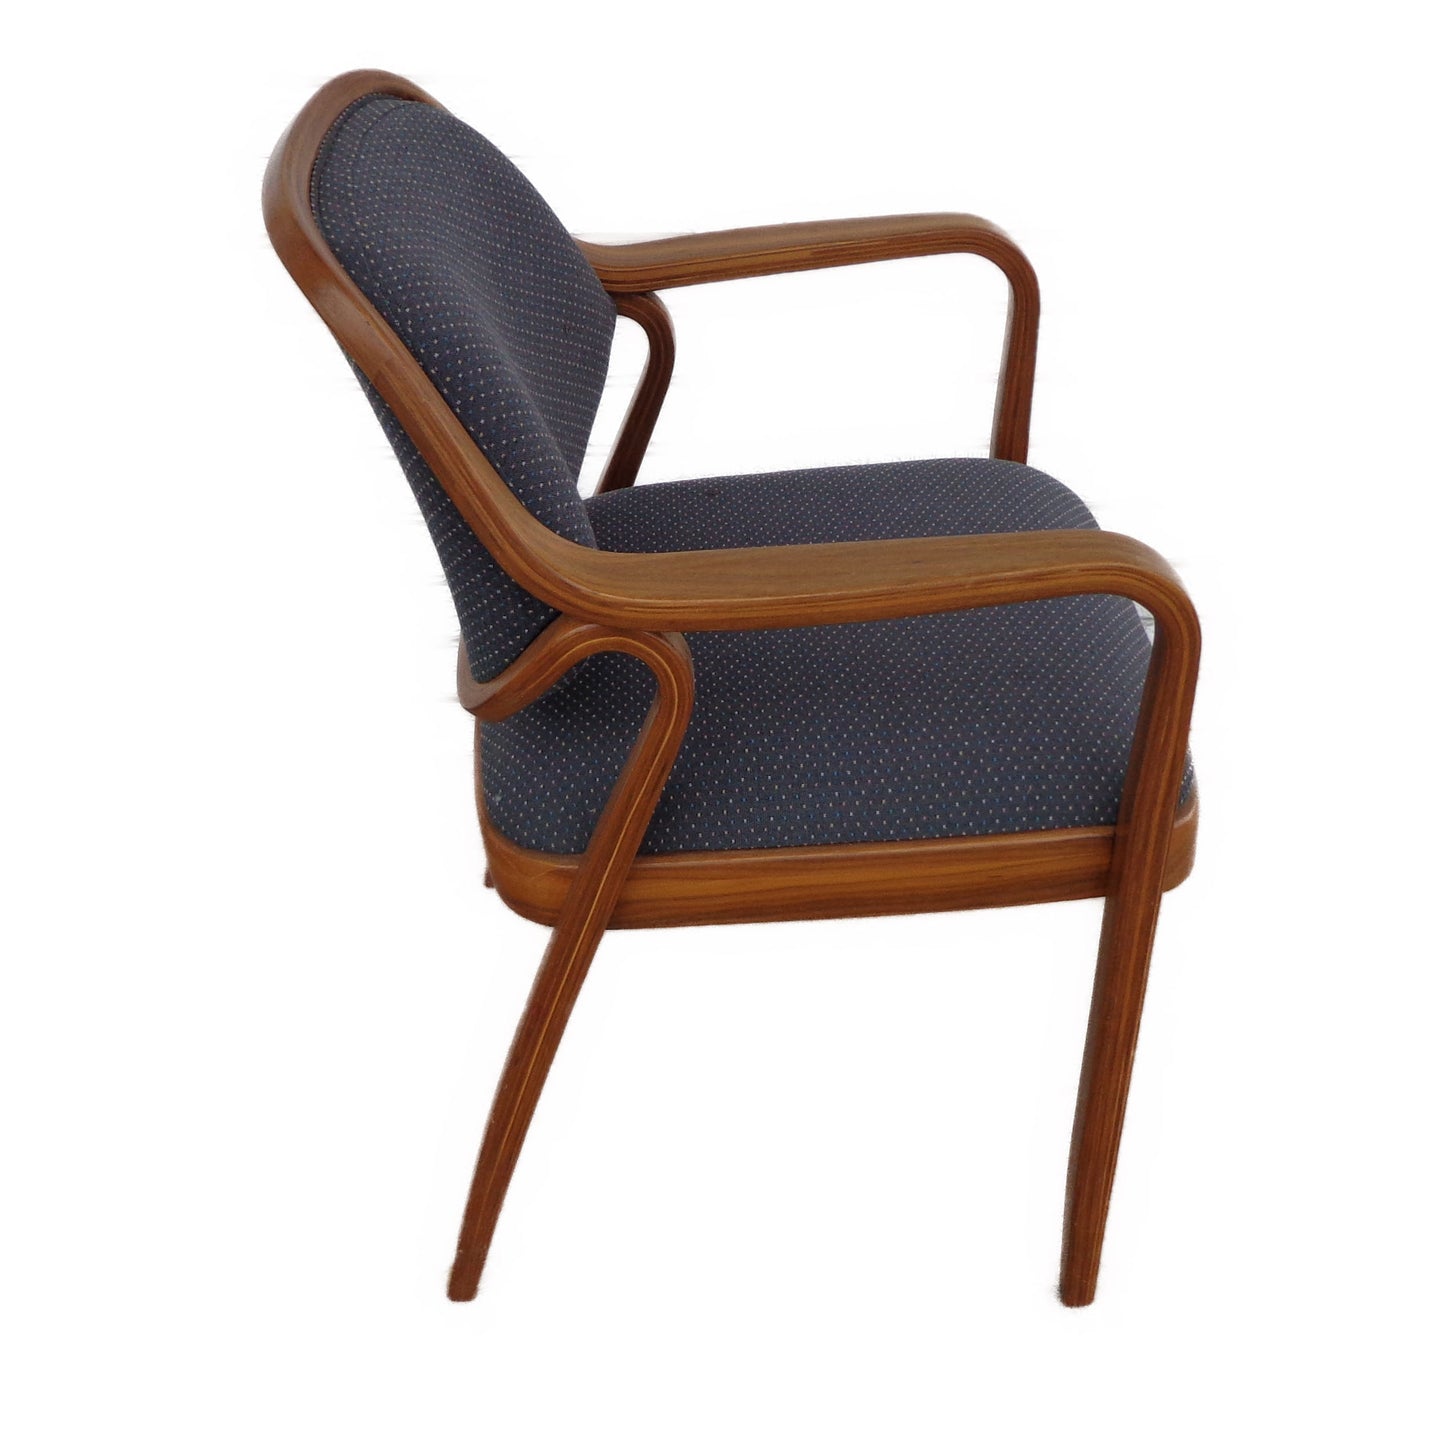 Vintage Bill Stephens Arm Chair for Knoll